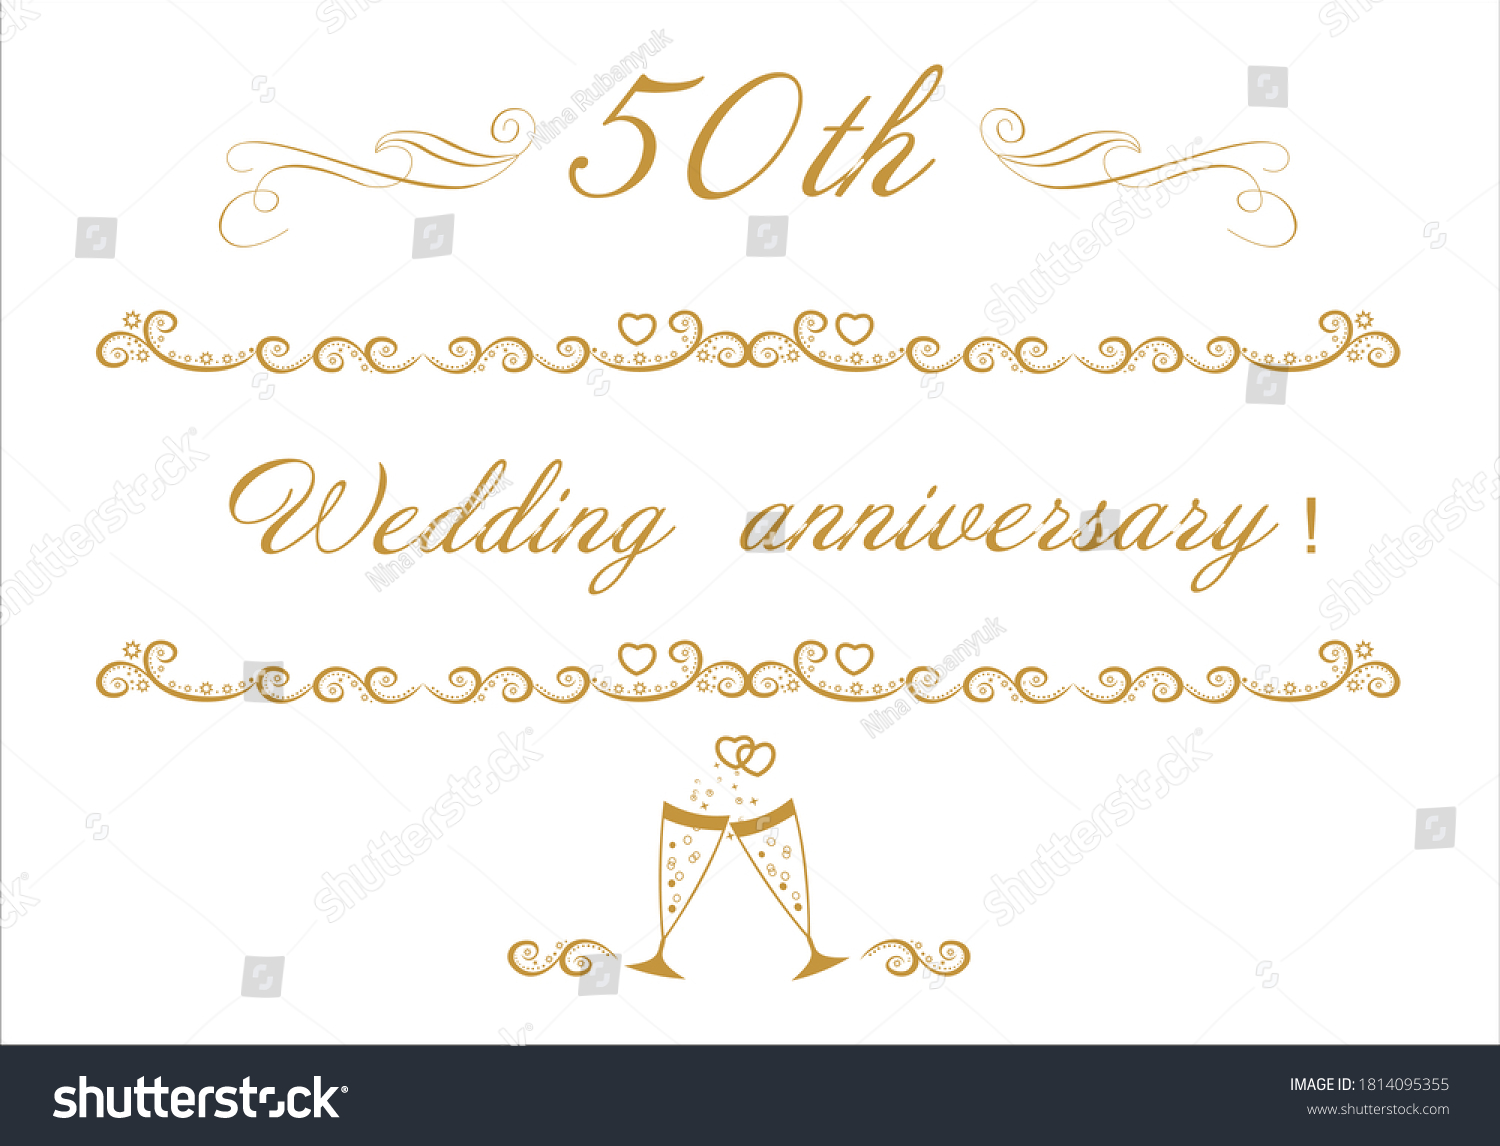 SVG of 50th wedding anniversary card for congratulations and writing text. Gold wedding anniversary celebration. Wedding invitation card white background. svg